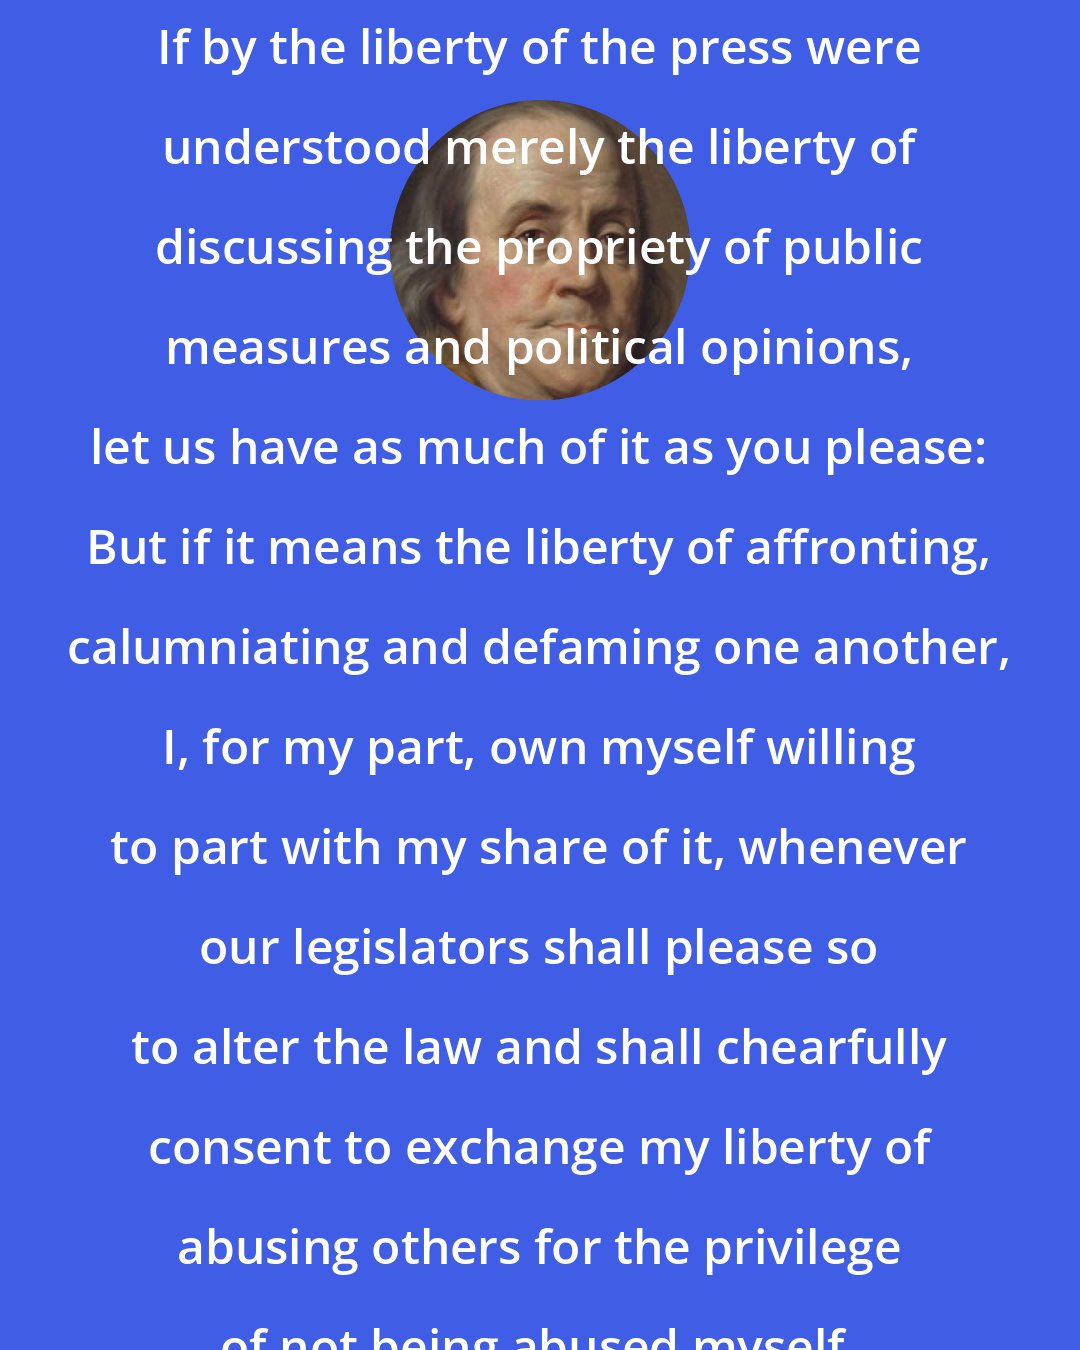 Benjamin Franklin: If by the liberty of the press were understood merely the liberty of discussing the propriety of public measures and political opinions, let us have as much of it as you please: But if it means the liberty of affronting, calumniating and defaming one another, I, for my part, own myself willing to part with my share of it, whenever our legislators shall please so to alter the law and shall chearfully consent to exchange my liberty of abusing others for the privilege of not being abused myself.